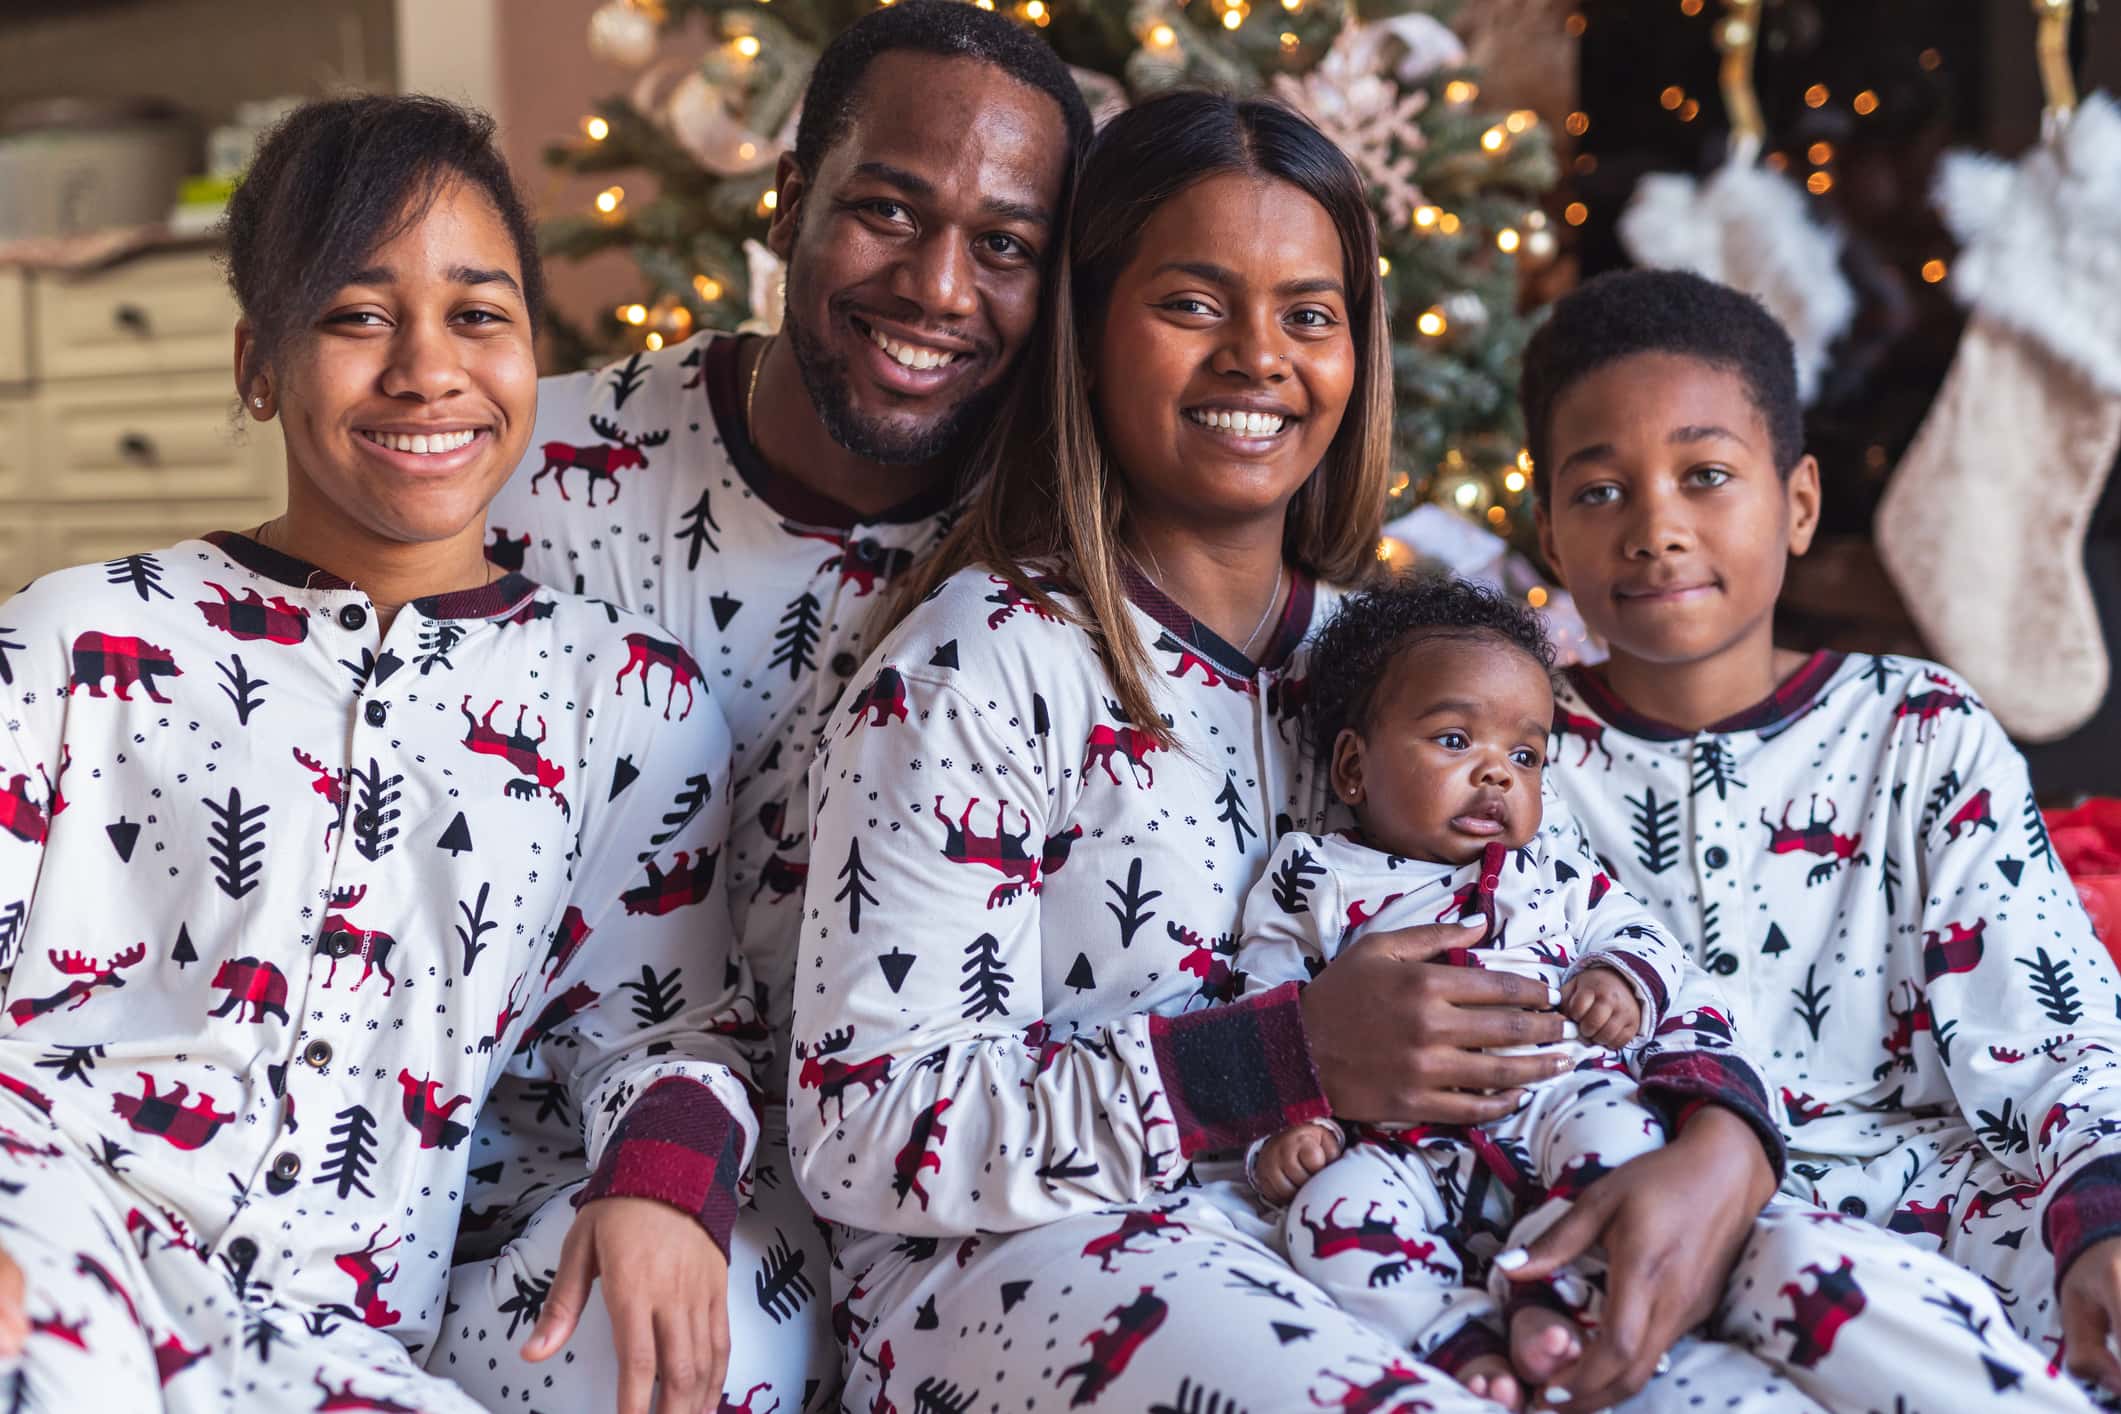 An attractive mixed race family wear matching Christmas pyjamas on Christmas Day. They are looking directly at the camera and smiling.